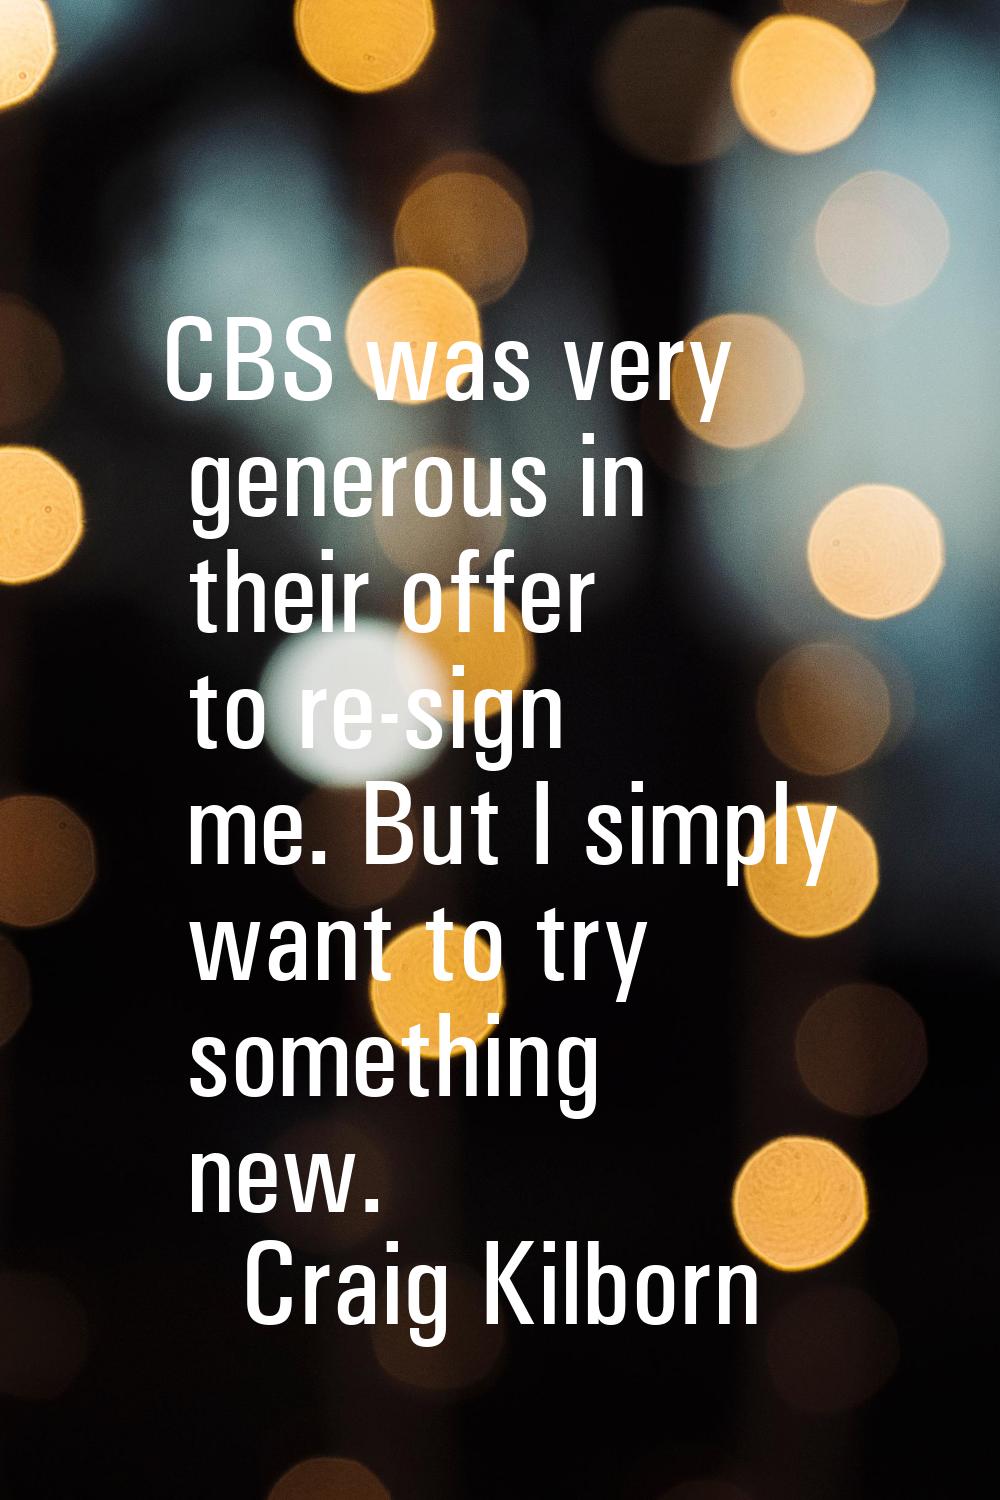 CBS was very generous in their offer to re-sign me. But I simply want to try something new.